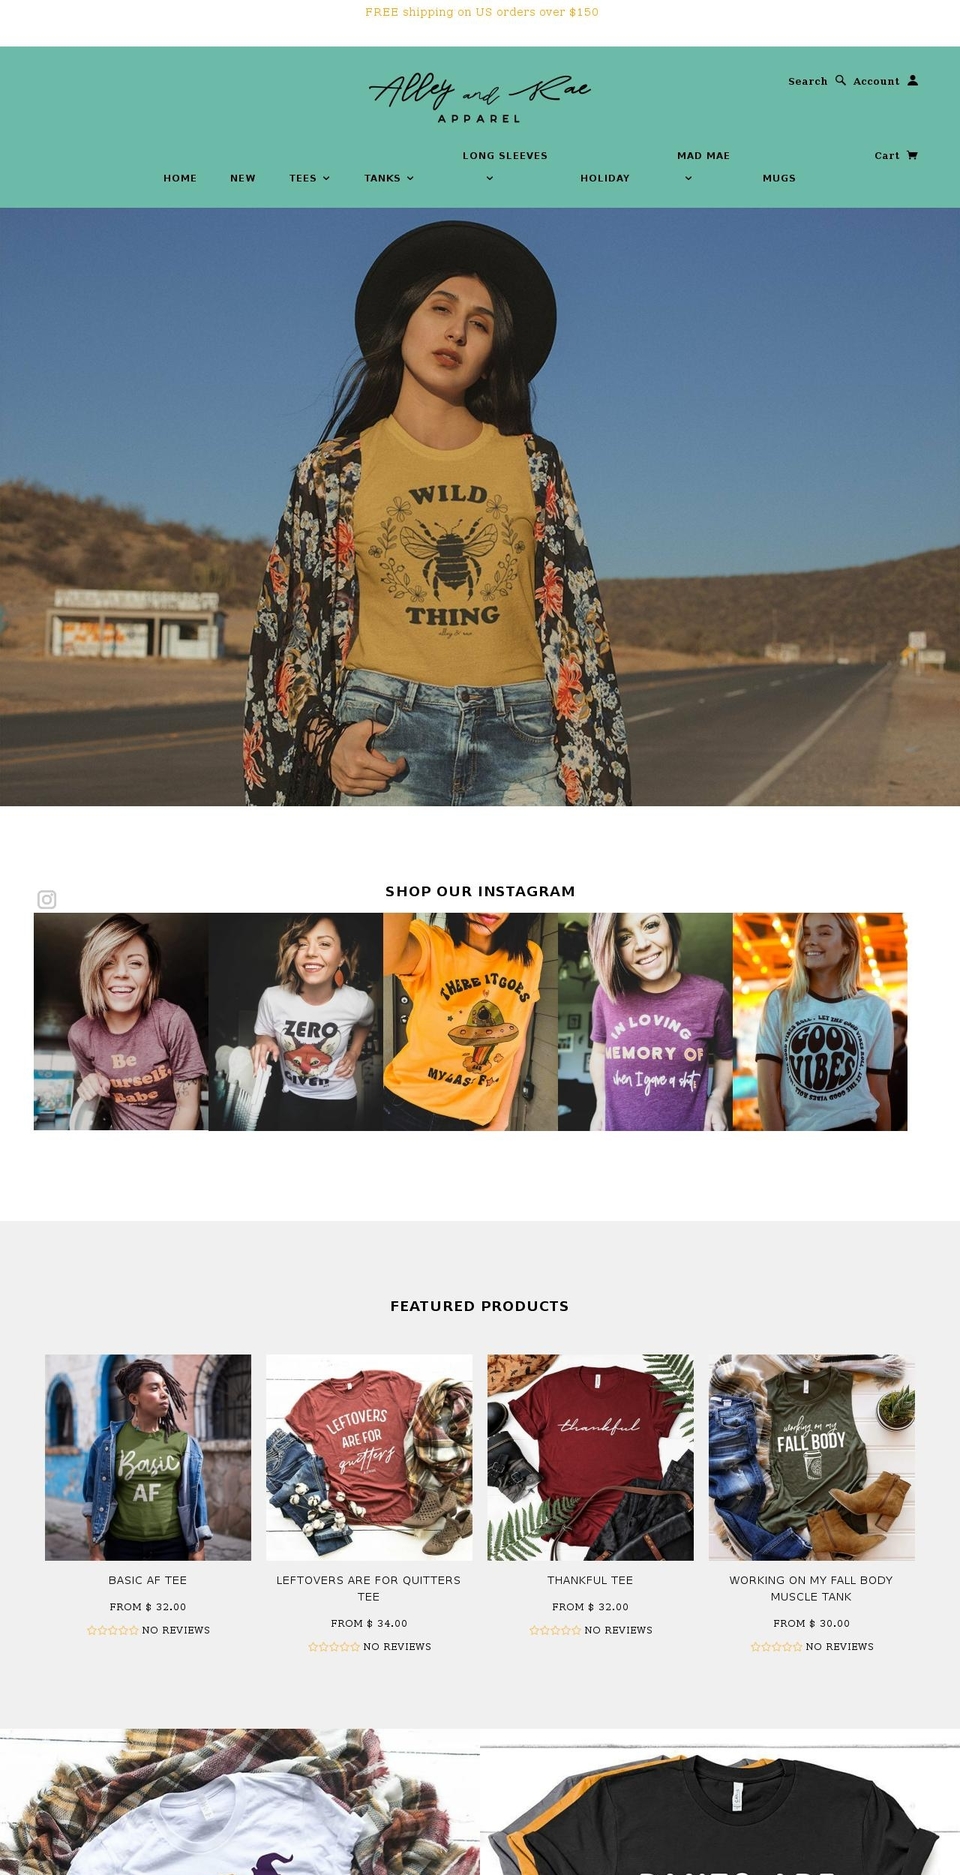 Tailor Shopify theme site example alleyrae.com